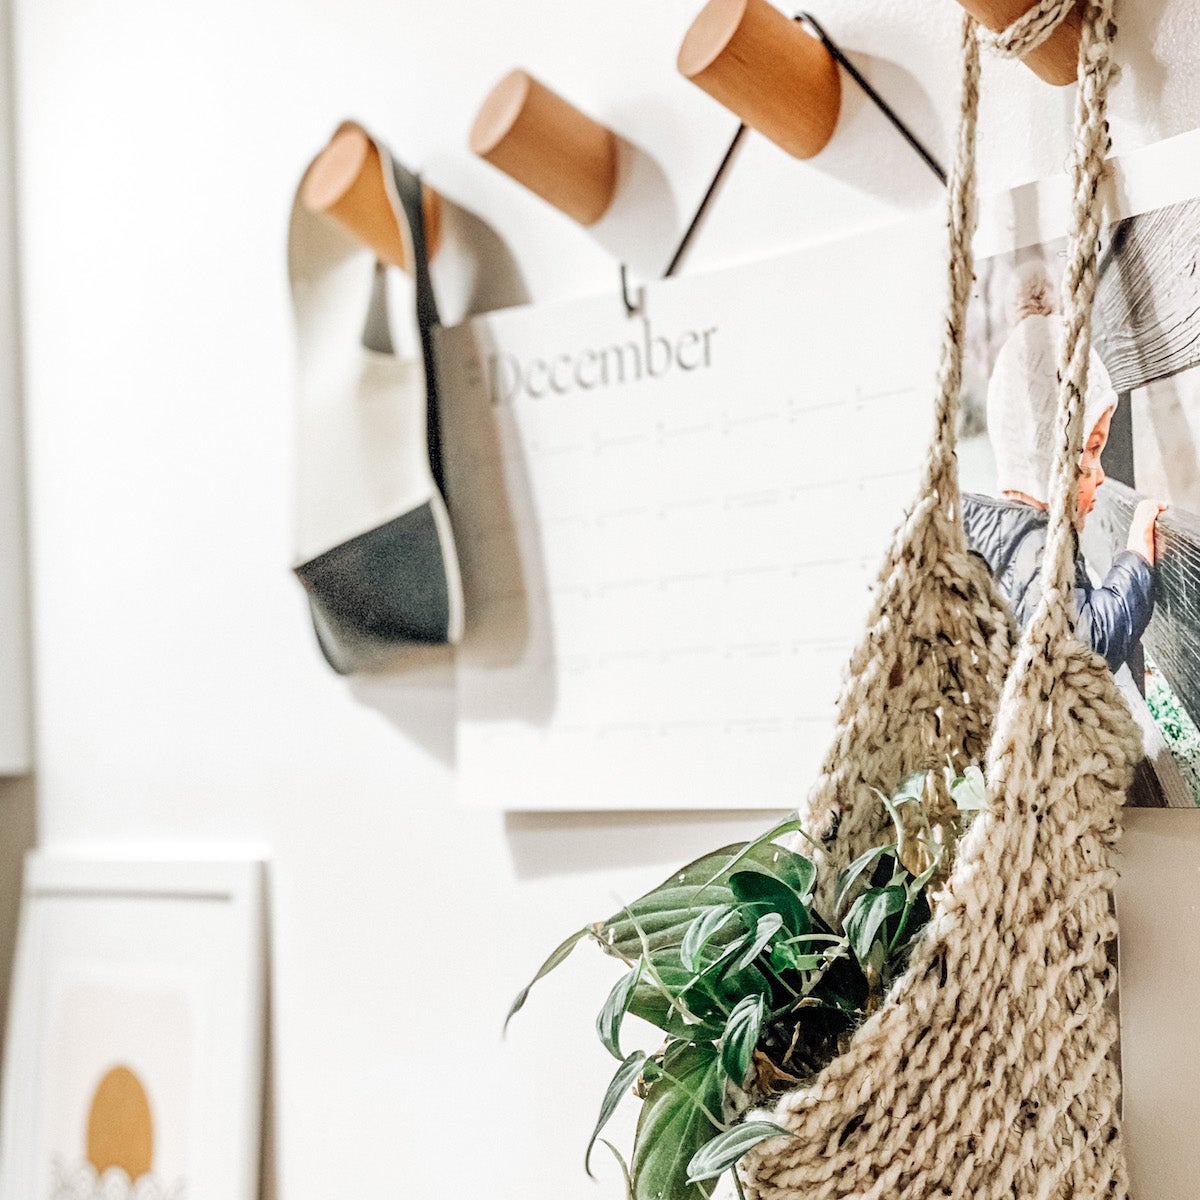 A textured basket filled with greenery and a wall calendar hung on the wall.